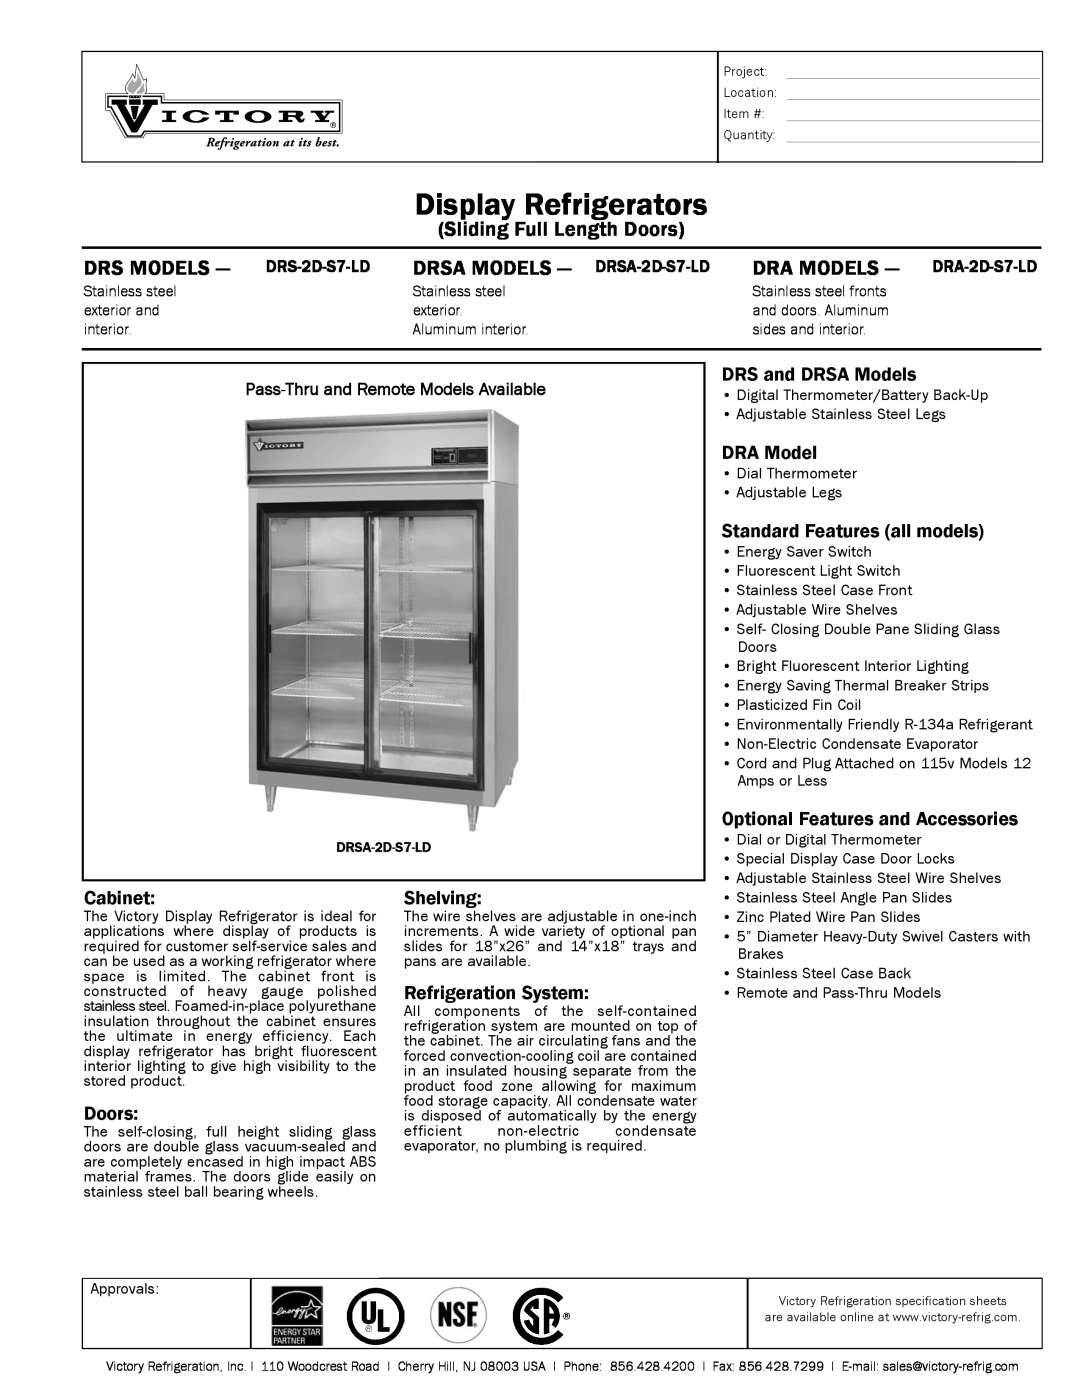 Victory Refrigeration DRA-2D-S7-LD specifications Pass-Thruand Remote Models Available, Display Refrigerators, DRA Model 